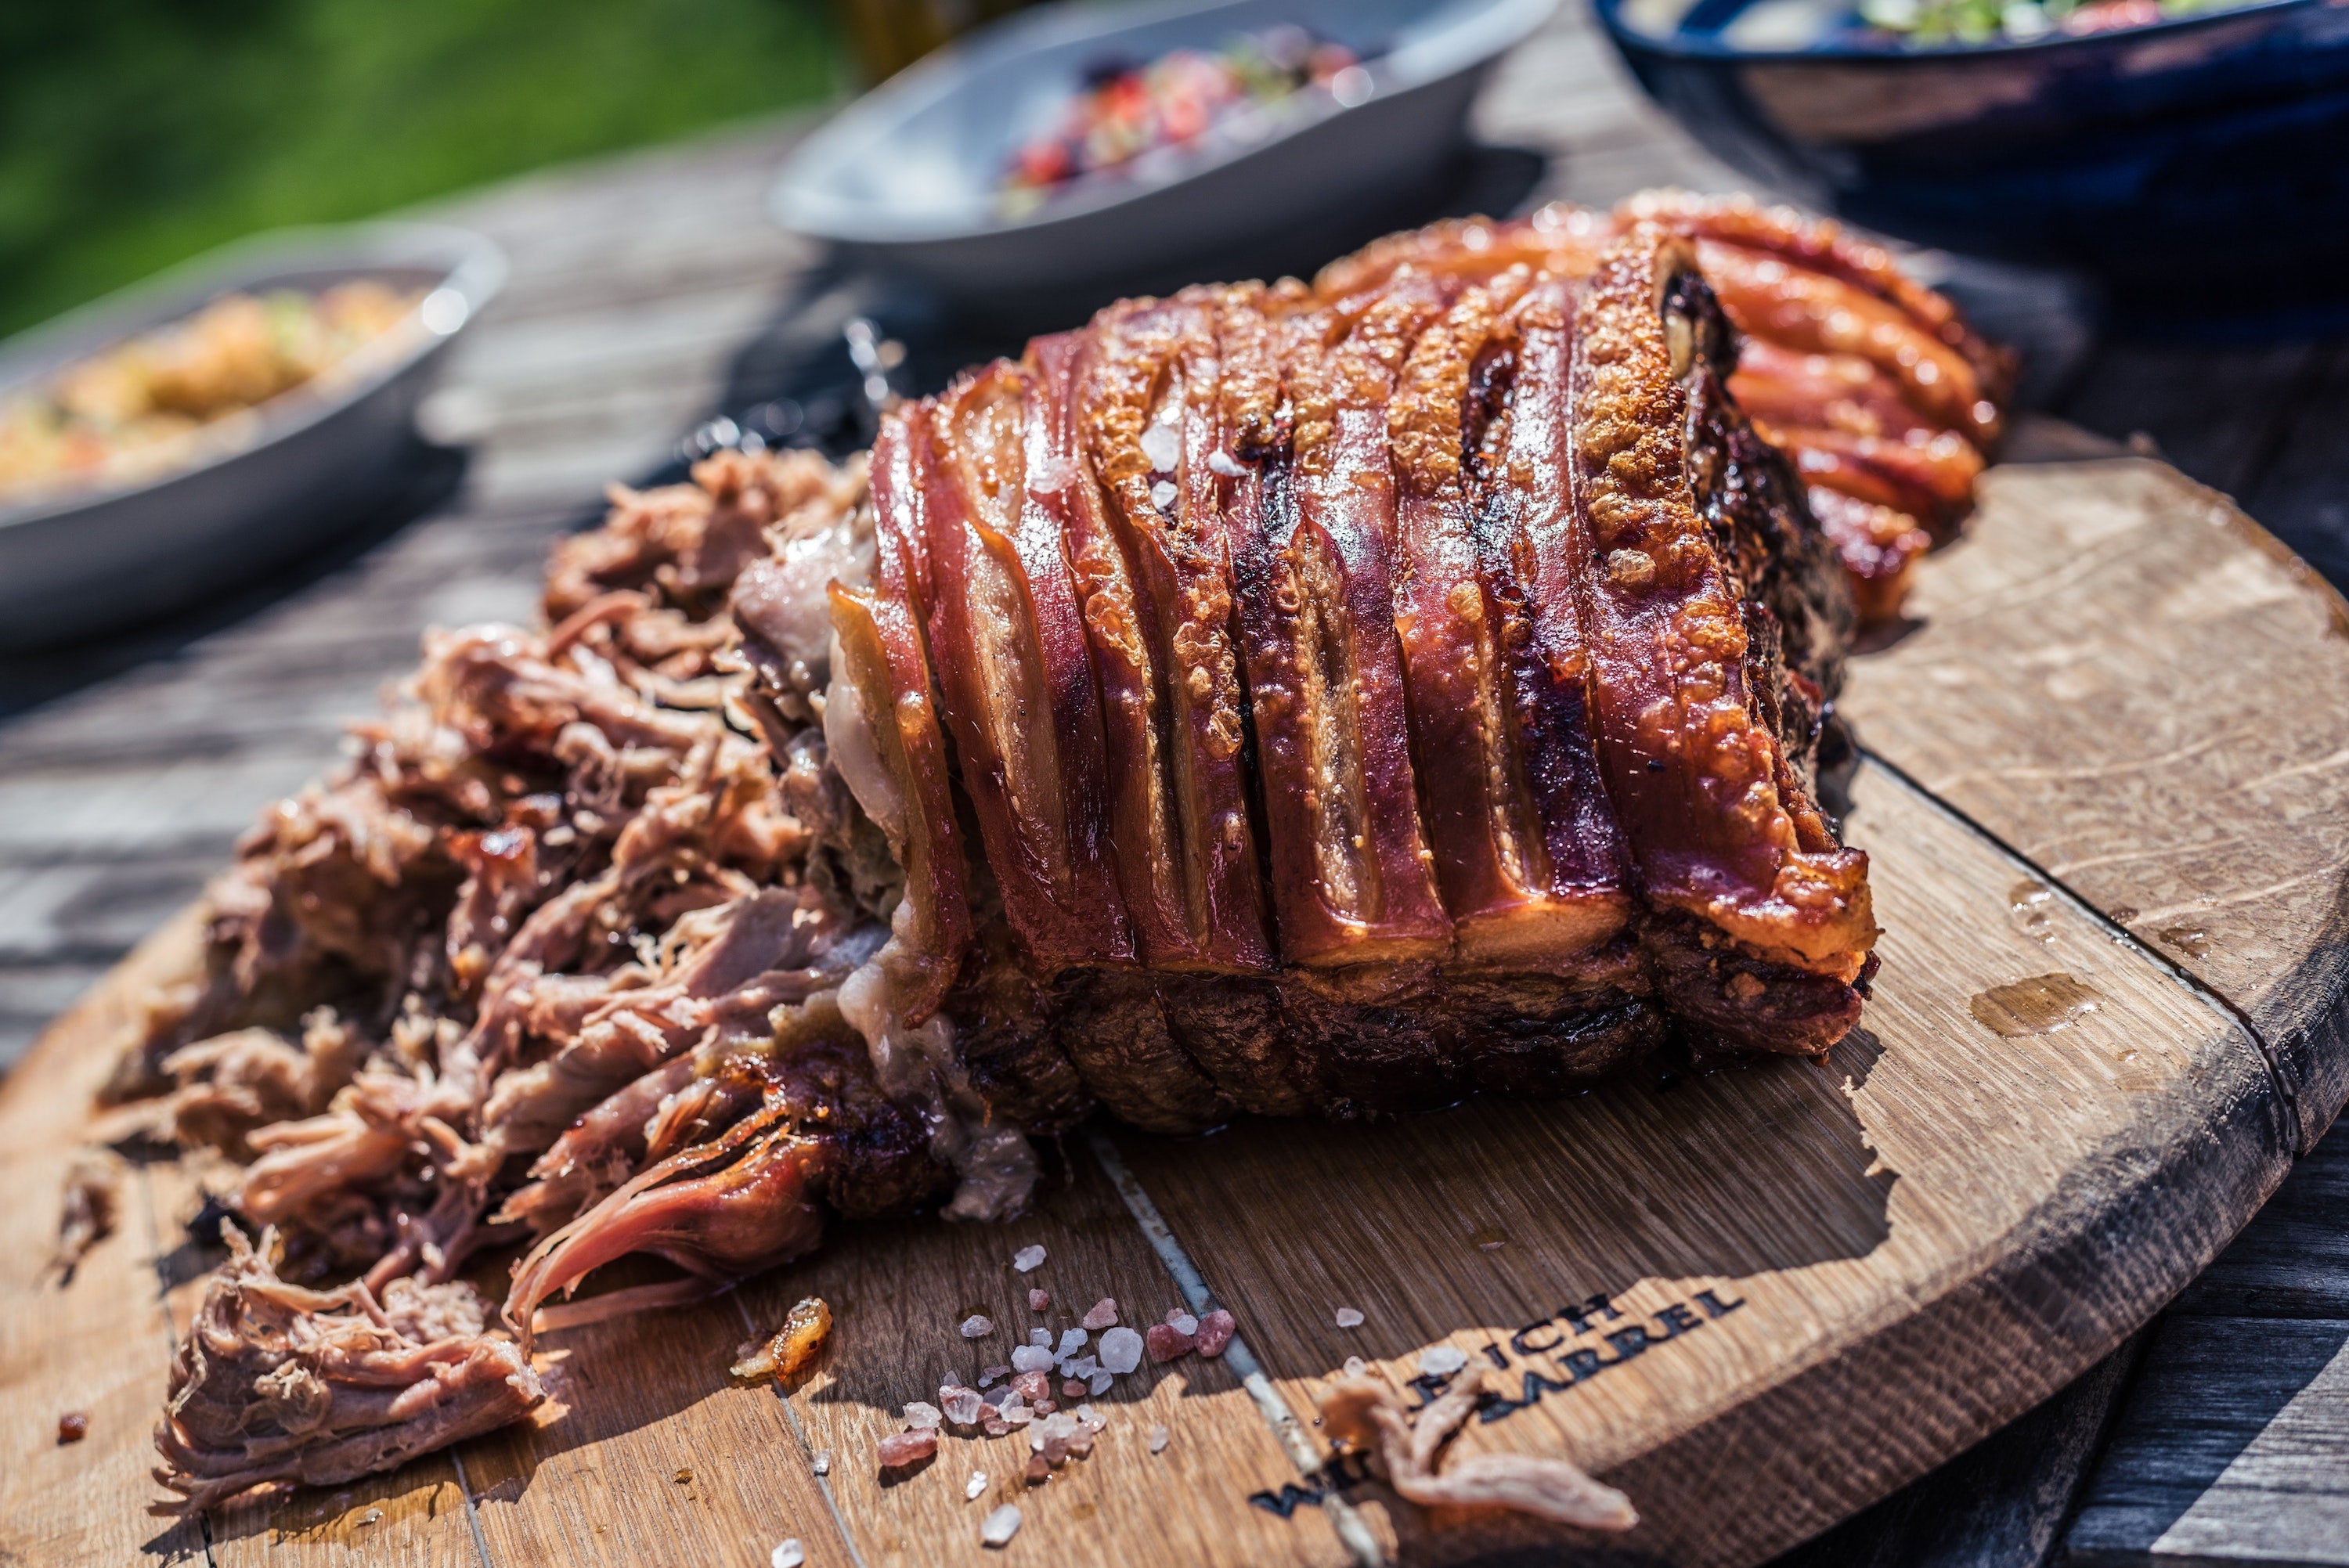 Make your Own: Smoked Pork with Fire Cider